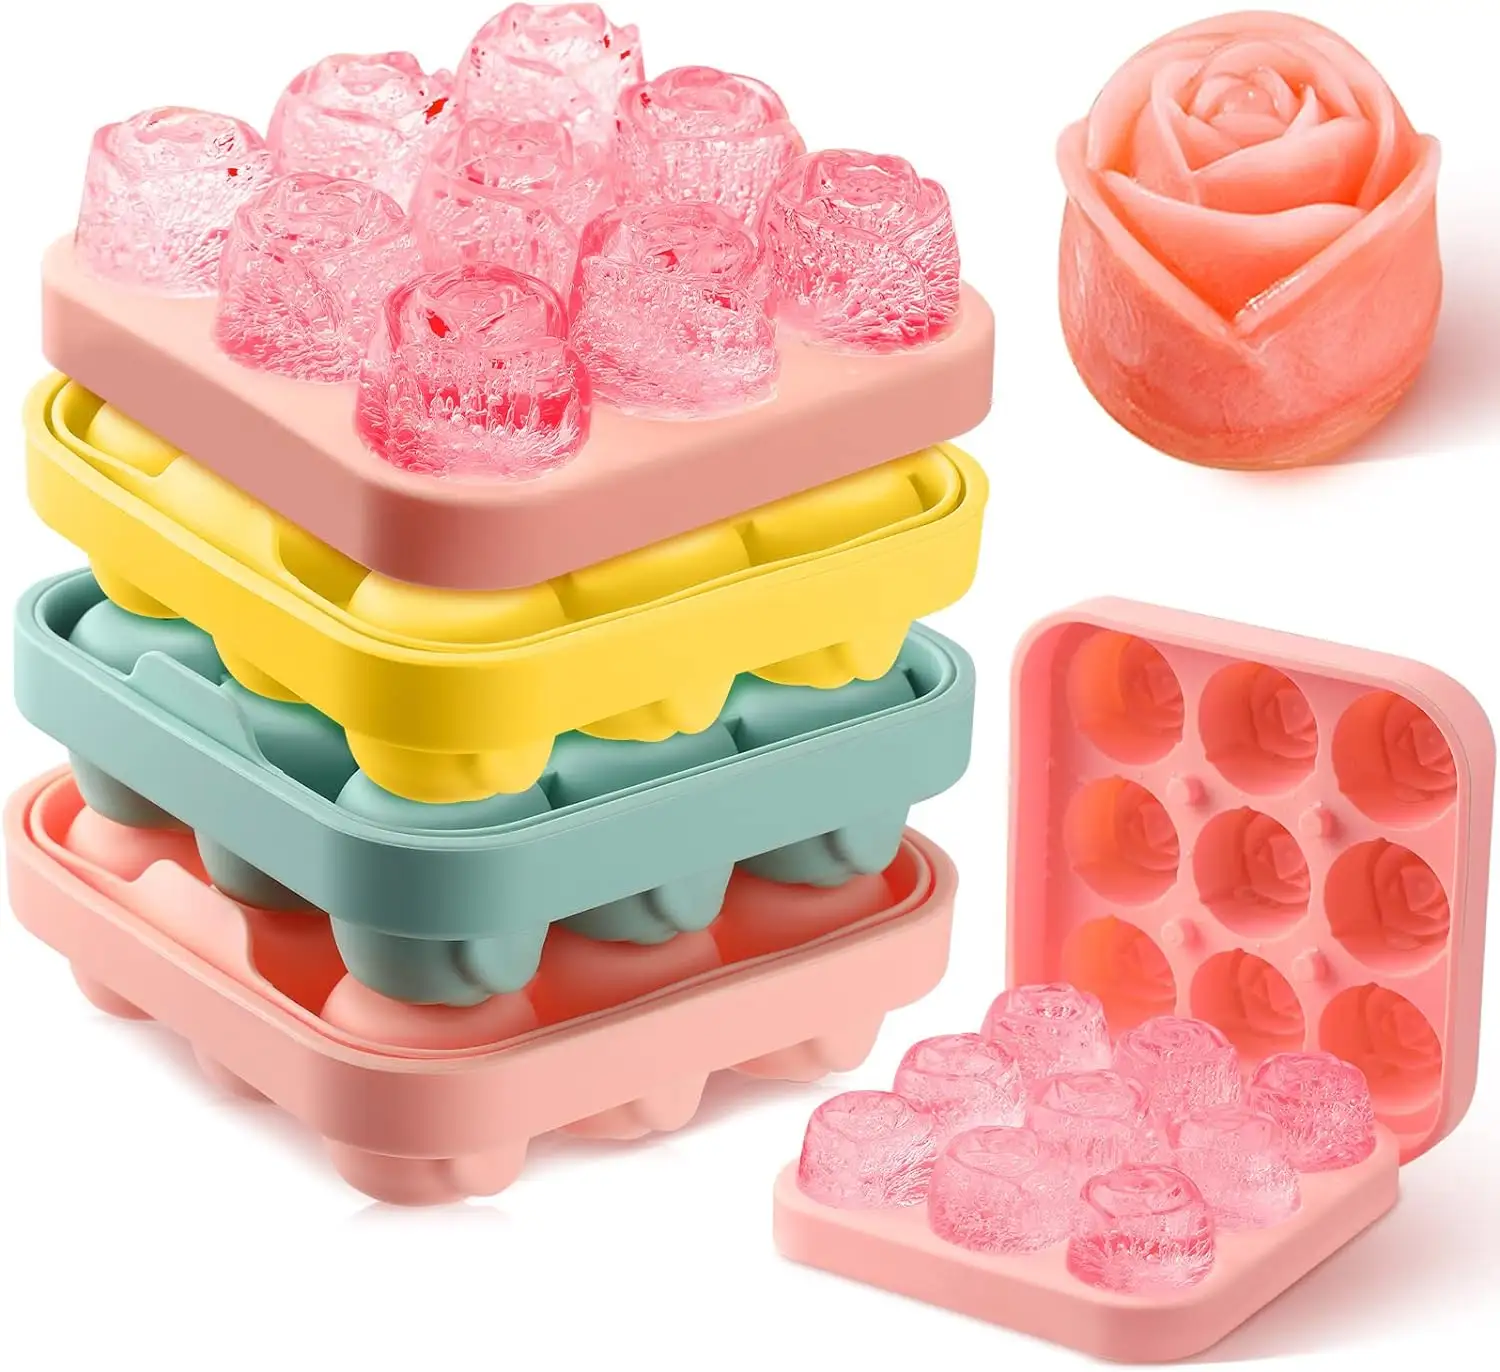 4 Pcs Silicone Rose Ice Cube Khuôn 3D Rose Ice Khuôn Với Bao Gồm Hoa Ice Cube Khay